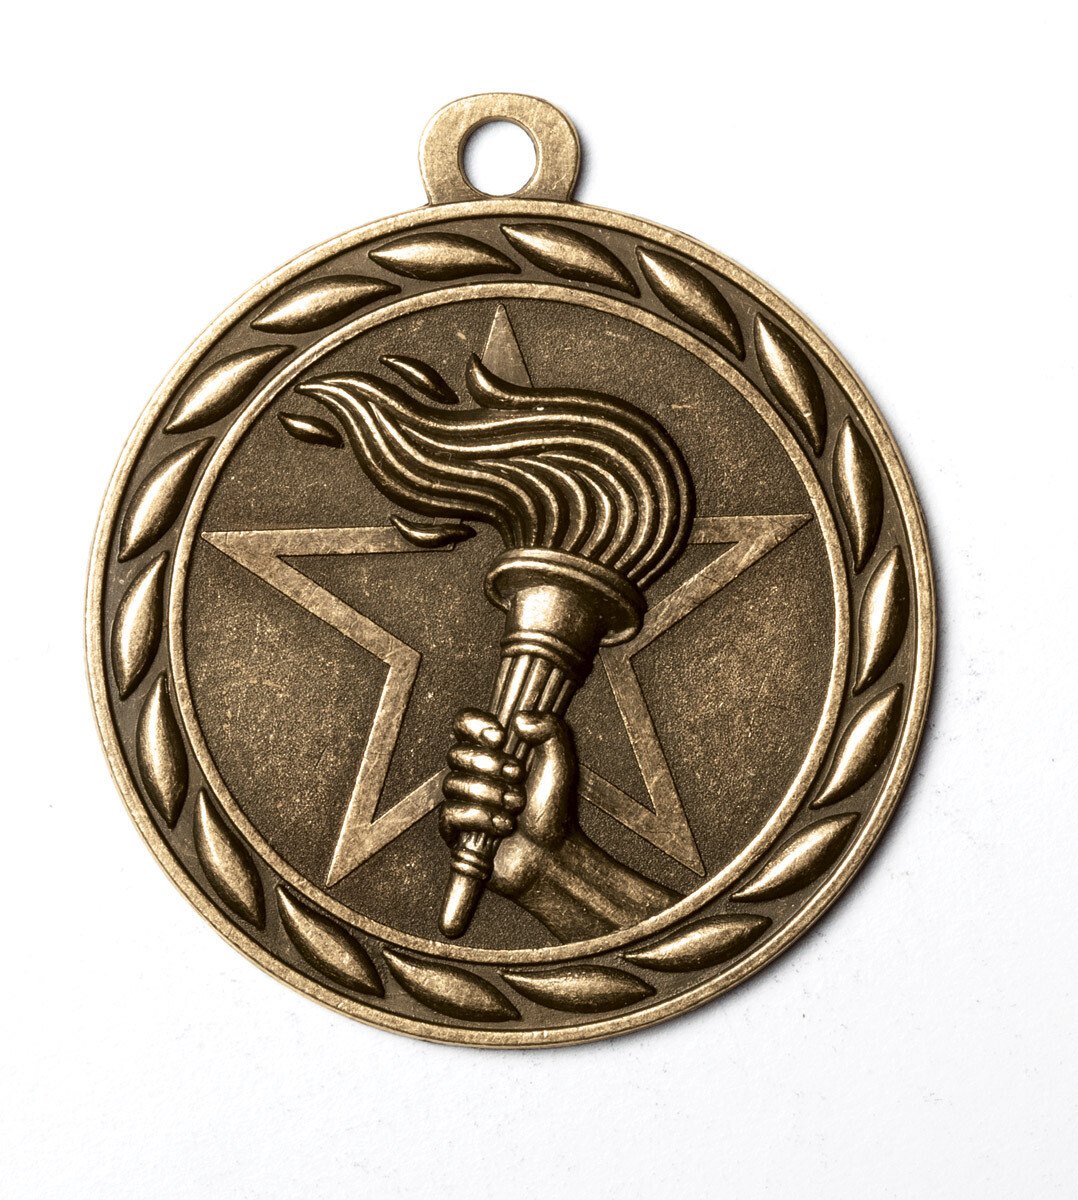 Scholastic Medal Series
VICTORY TORCH MEDAL